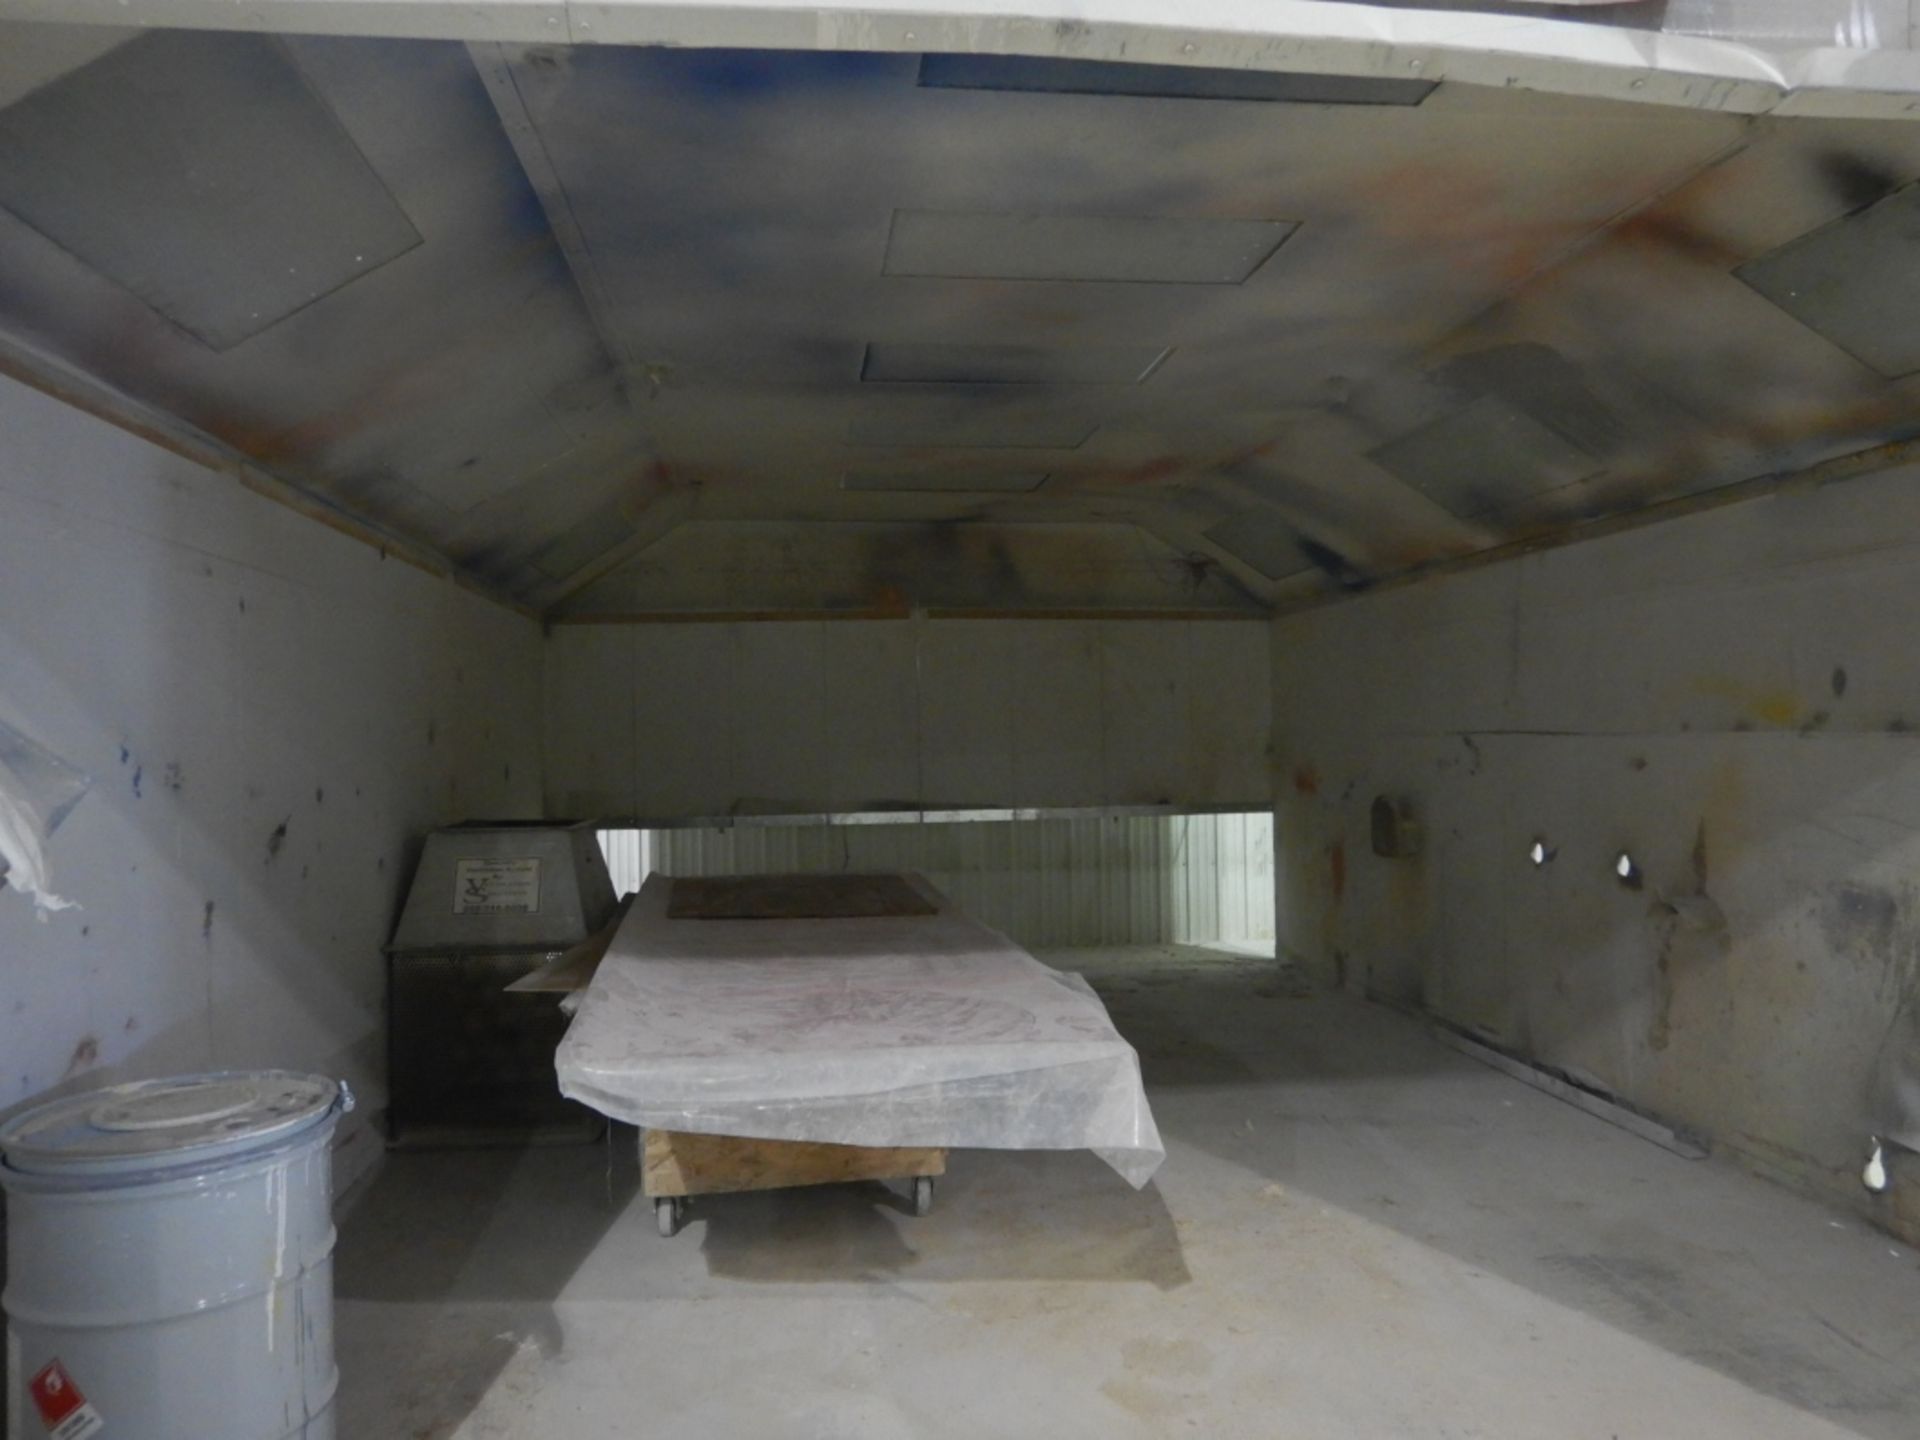 2008 CUSTOM MADE OPEN FACE SPRAY BOOTH 17'X25', LOCATED IN SYLVAN LAKE, AB, CANADA & REMOVAL IS THE - Image 3 of 4